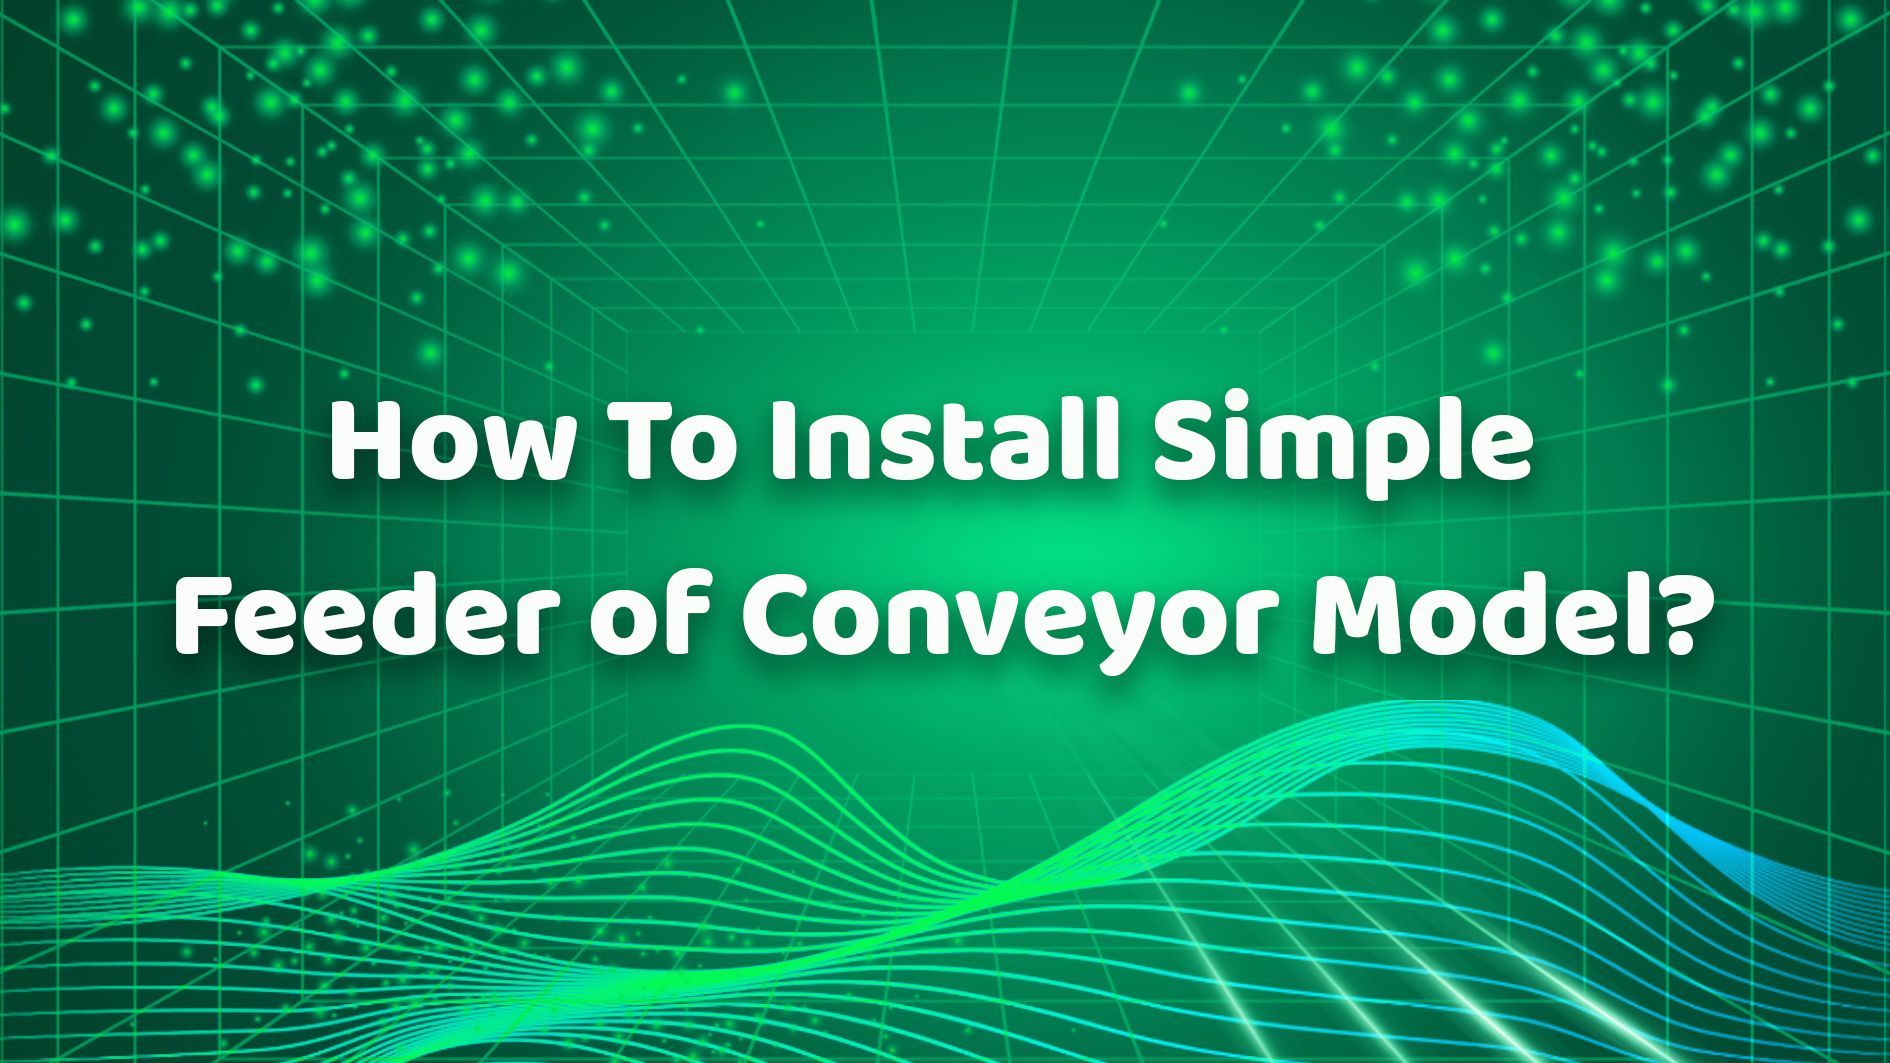 How To Install Simple Feeder of Conveyor Model？